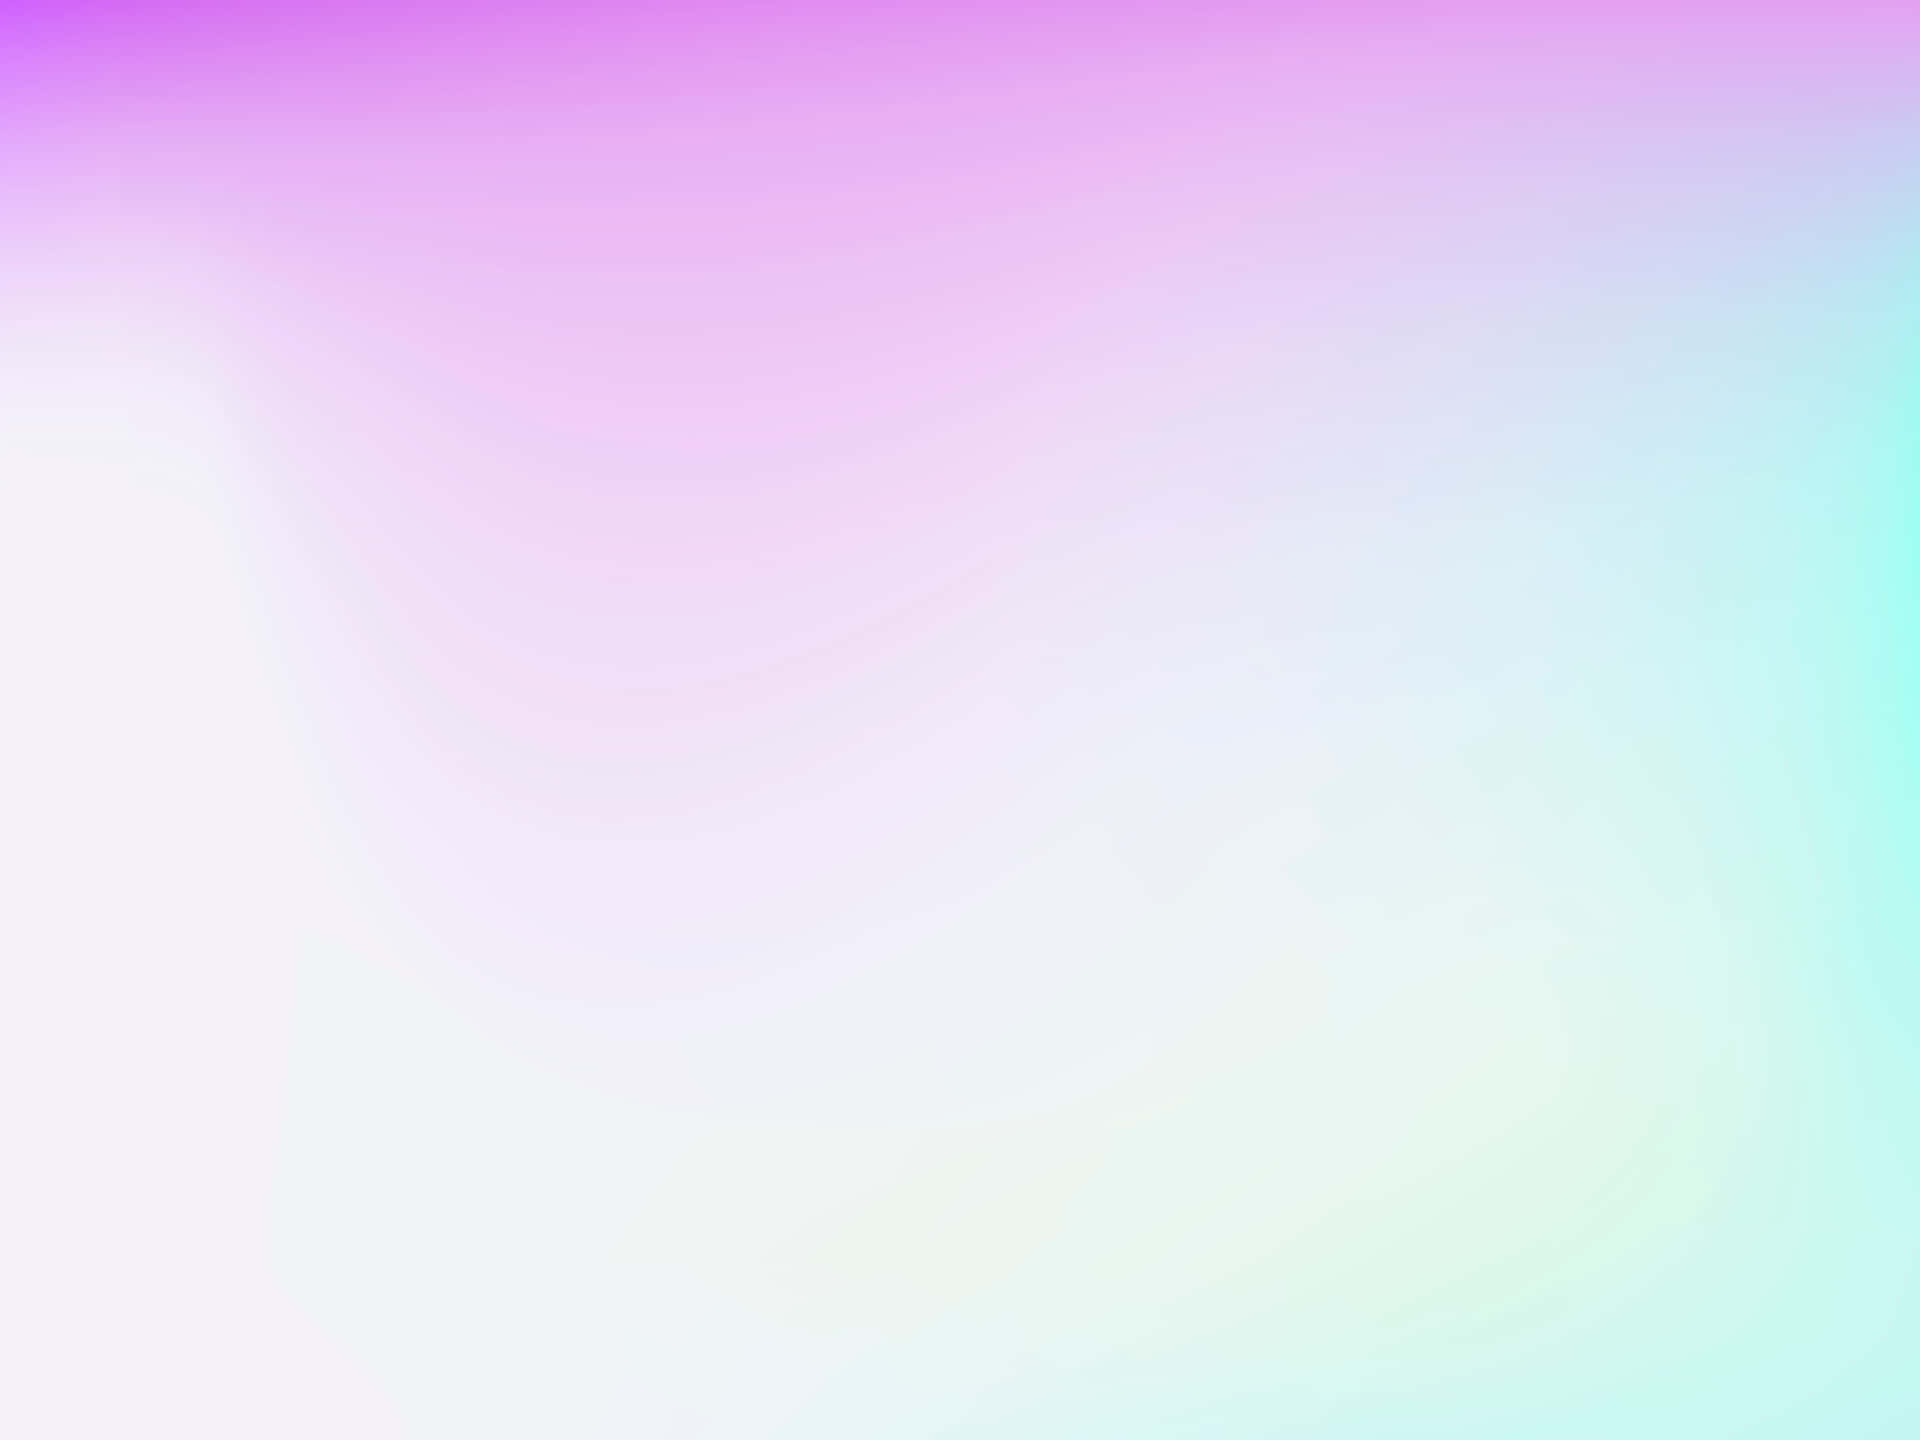 Pastel Gradient Background Blue And Purple Hues